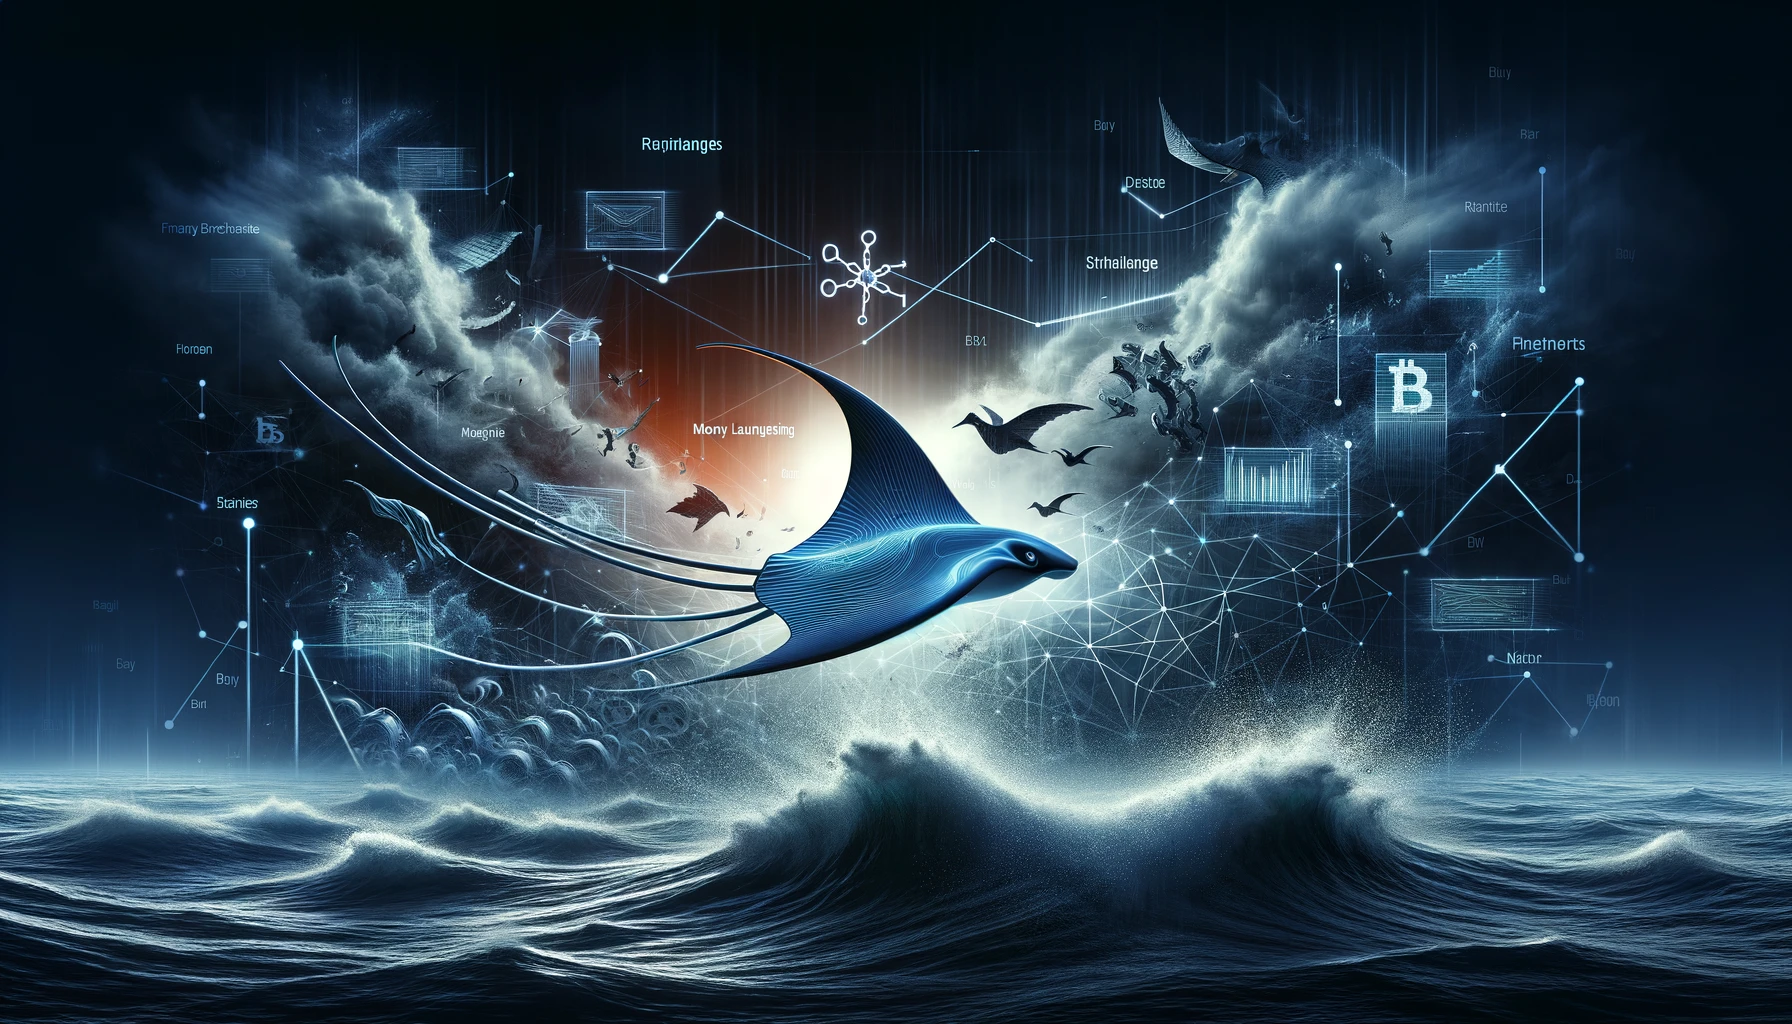 Manta Network Navigates DDoS Attack and Money Laundering Allegations During Key Listings